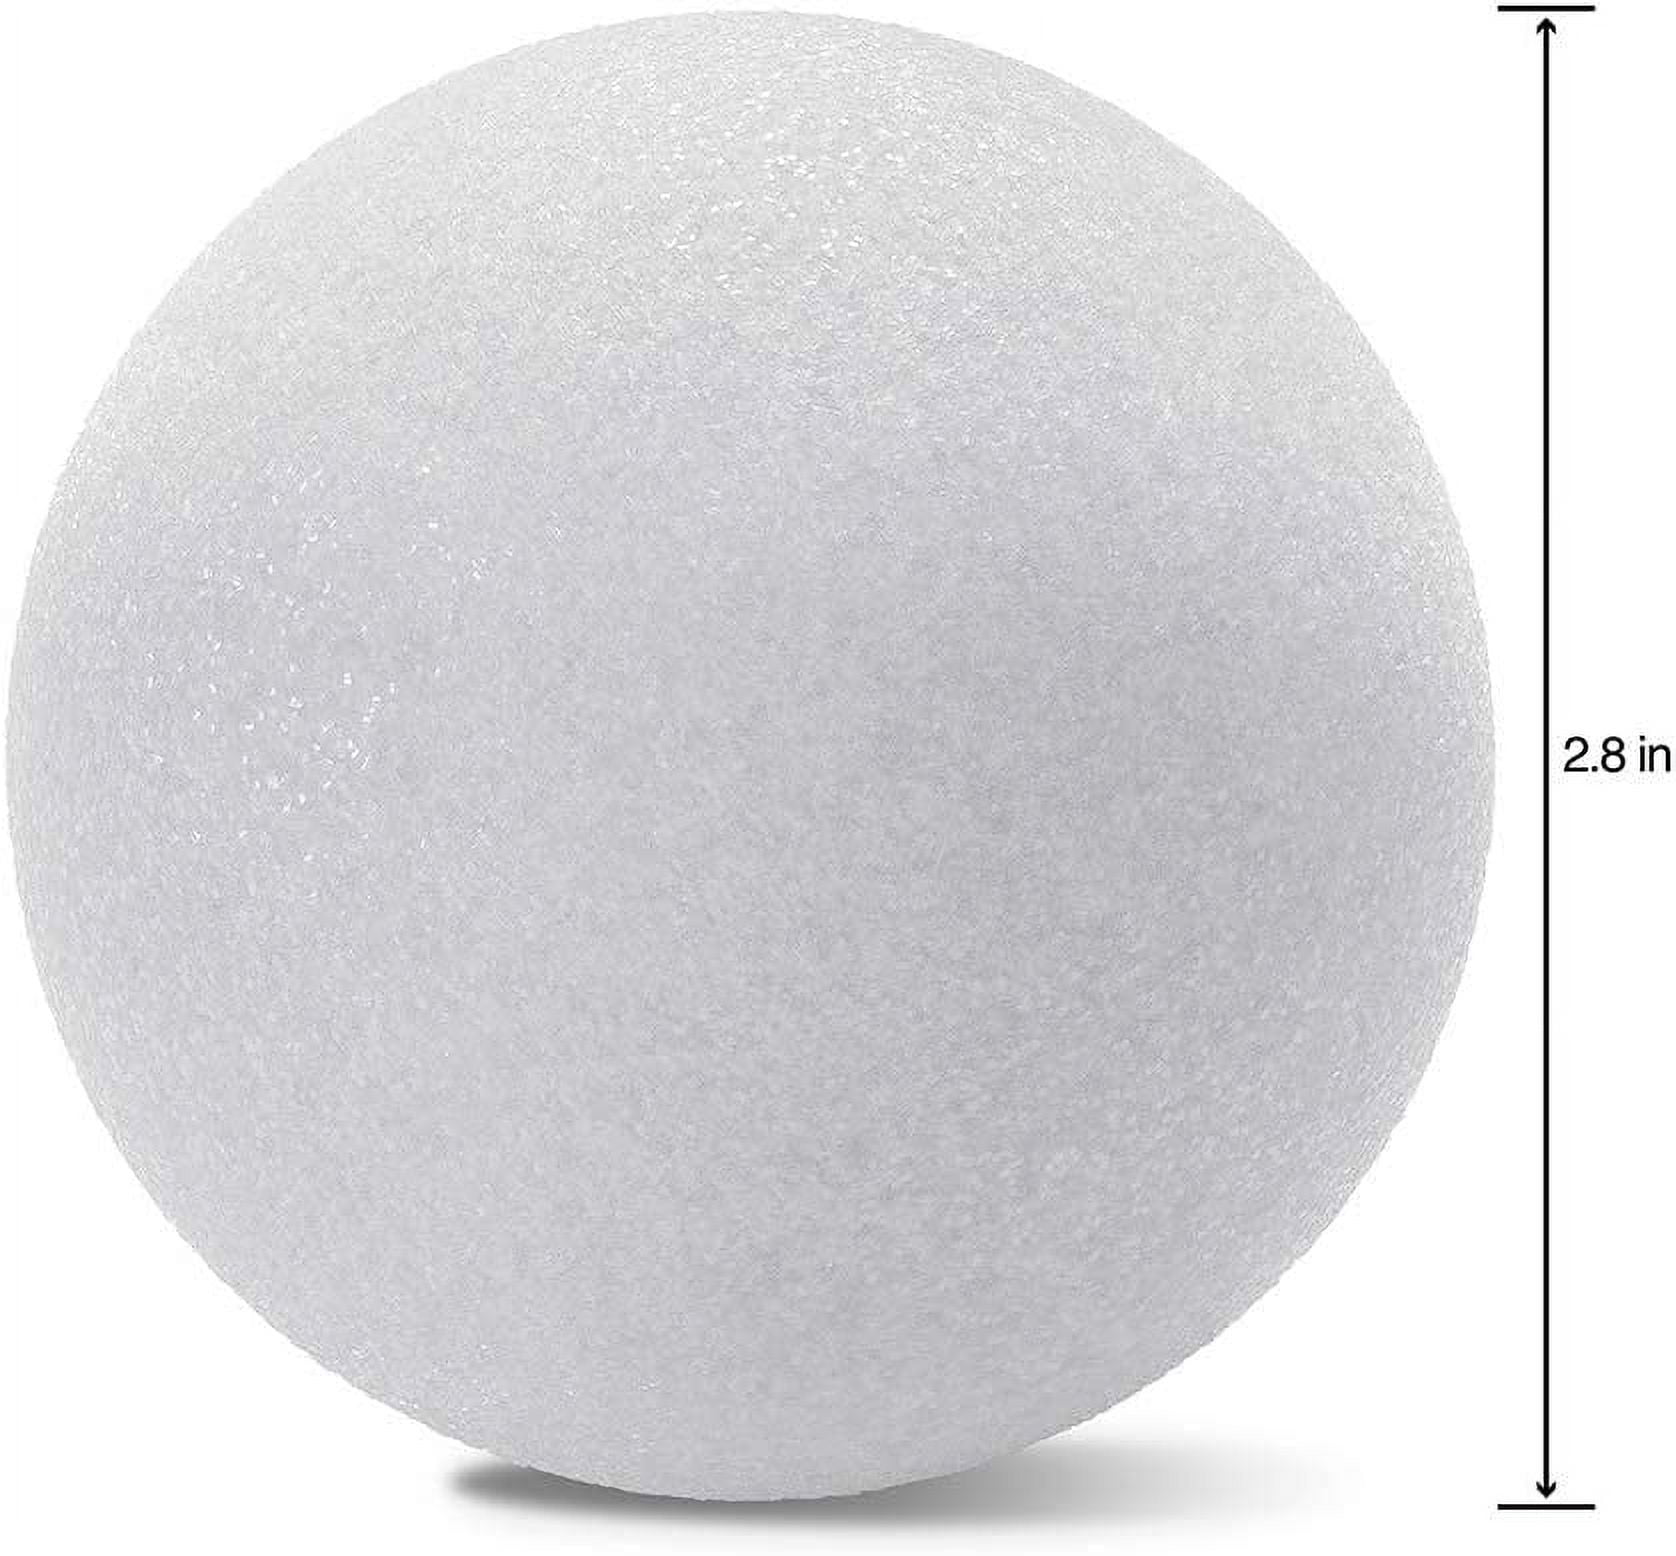 Smooth Foam 6-inch Ball for Crafts - Bulk 8 Pack - Plasteel Brand - Made in  The USA